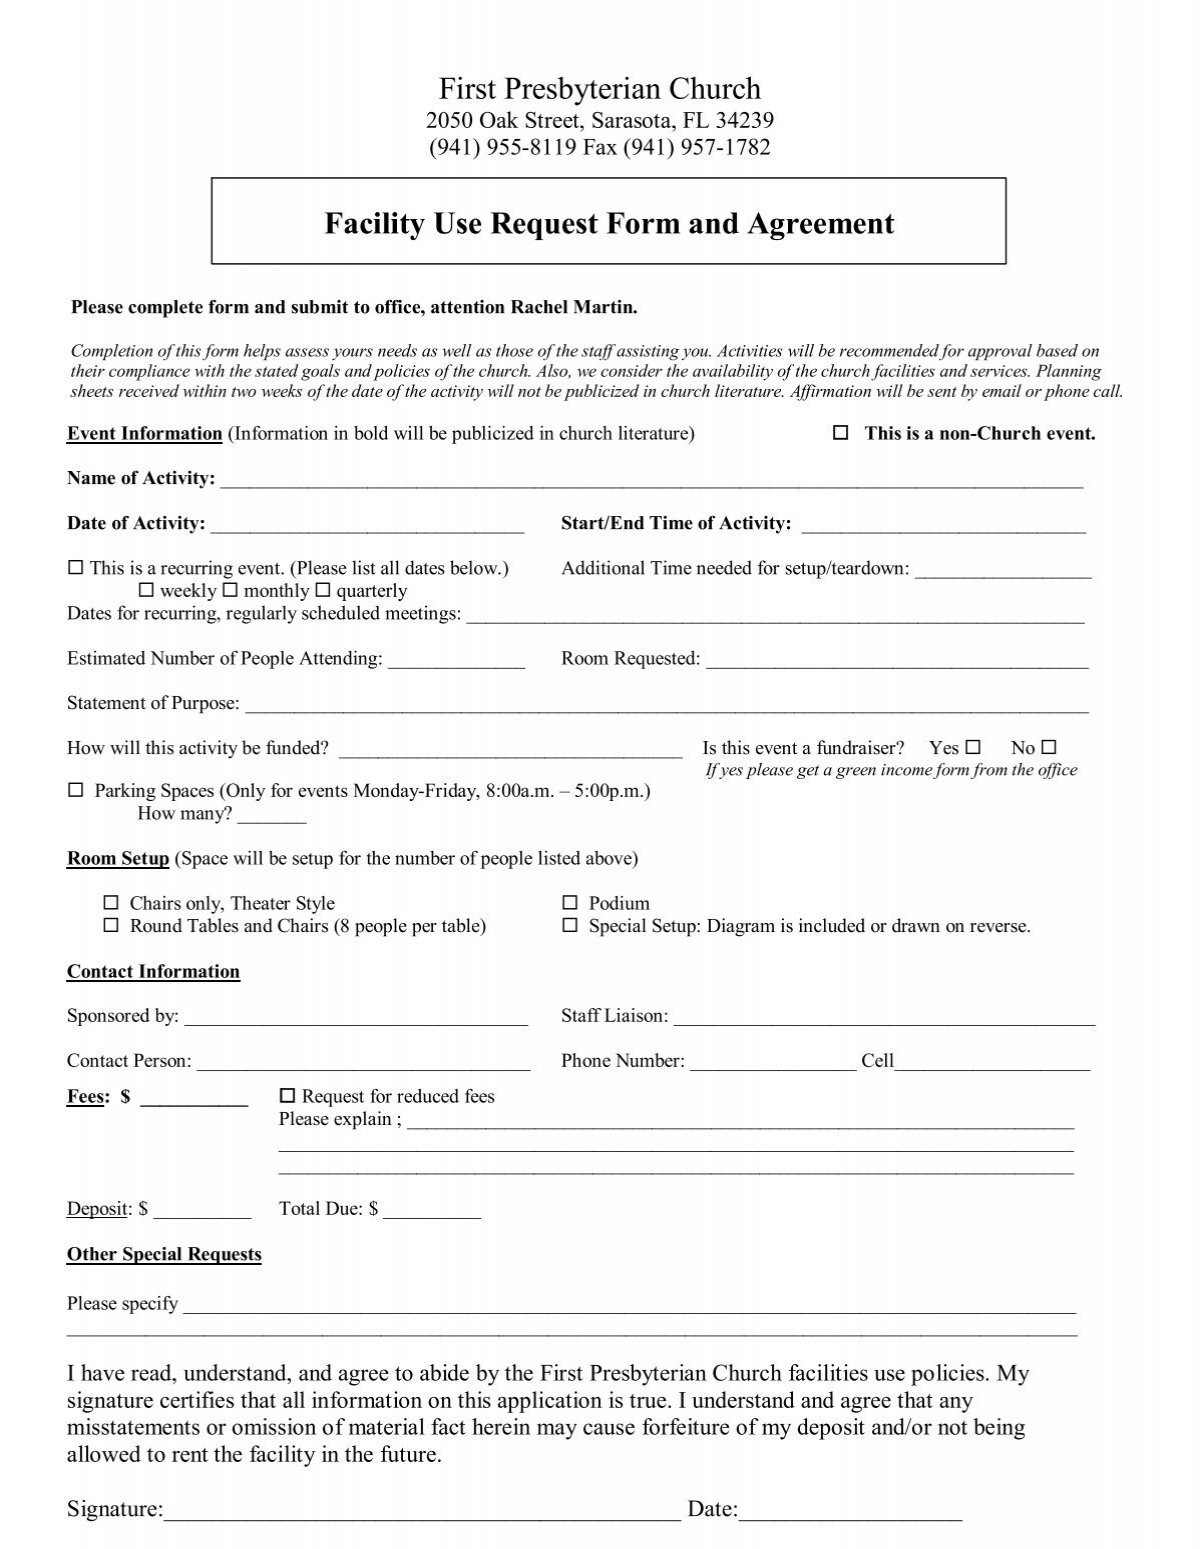 first-presbyterian-church-facility-use-request-form-and-agreement